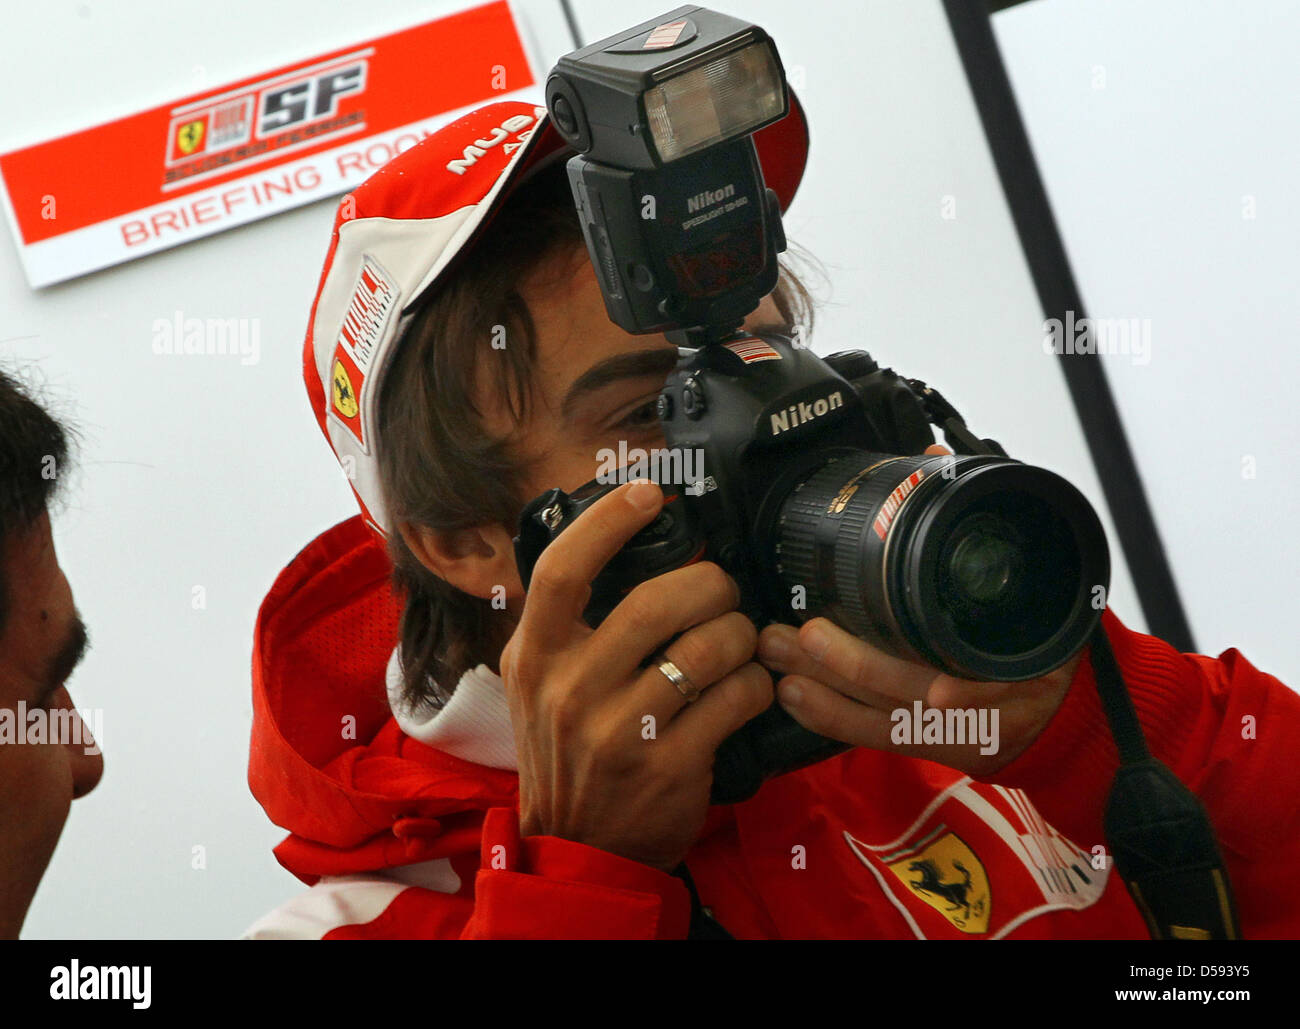 Spanish driver Fernando Alonso of Scuderia Ferrari checks out the camera of an Italian photographer in the paddock of Gille Villeneuve race track in Montreal, Canada, 10 June 2010. The Formula 1 Grand Prix of Canada will be held on 13 June. Photo: JENS BUETTNER Stock Photo